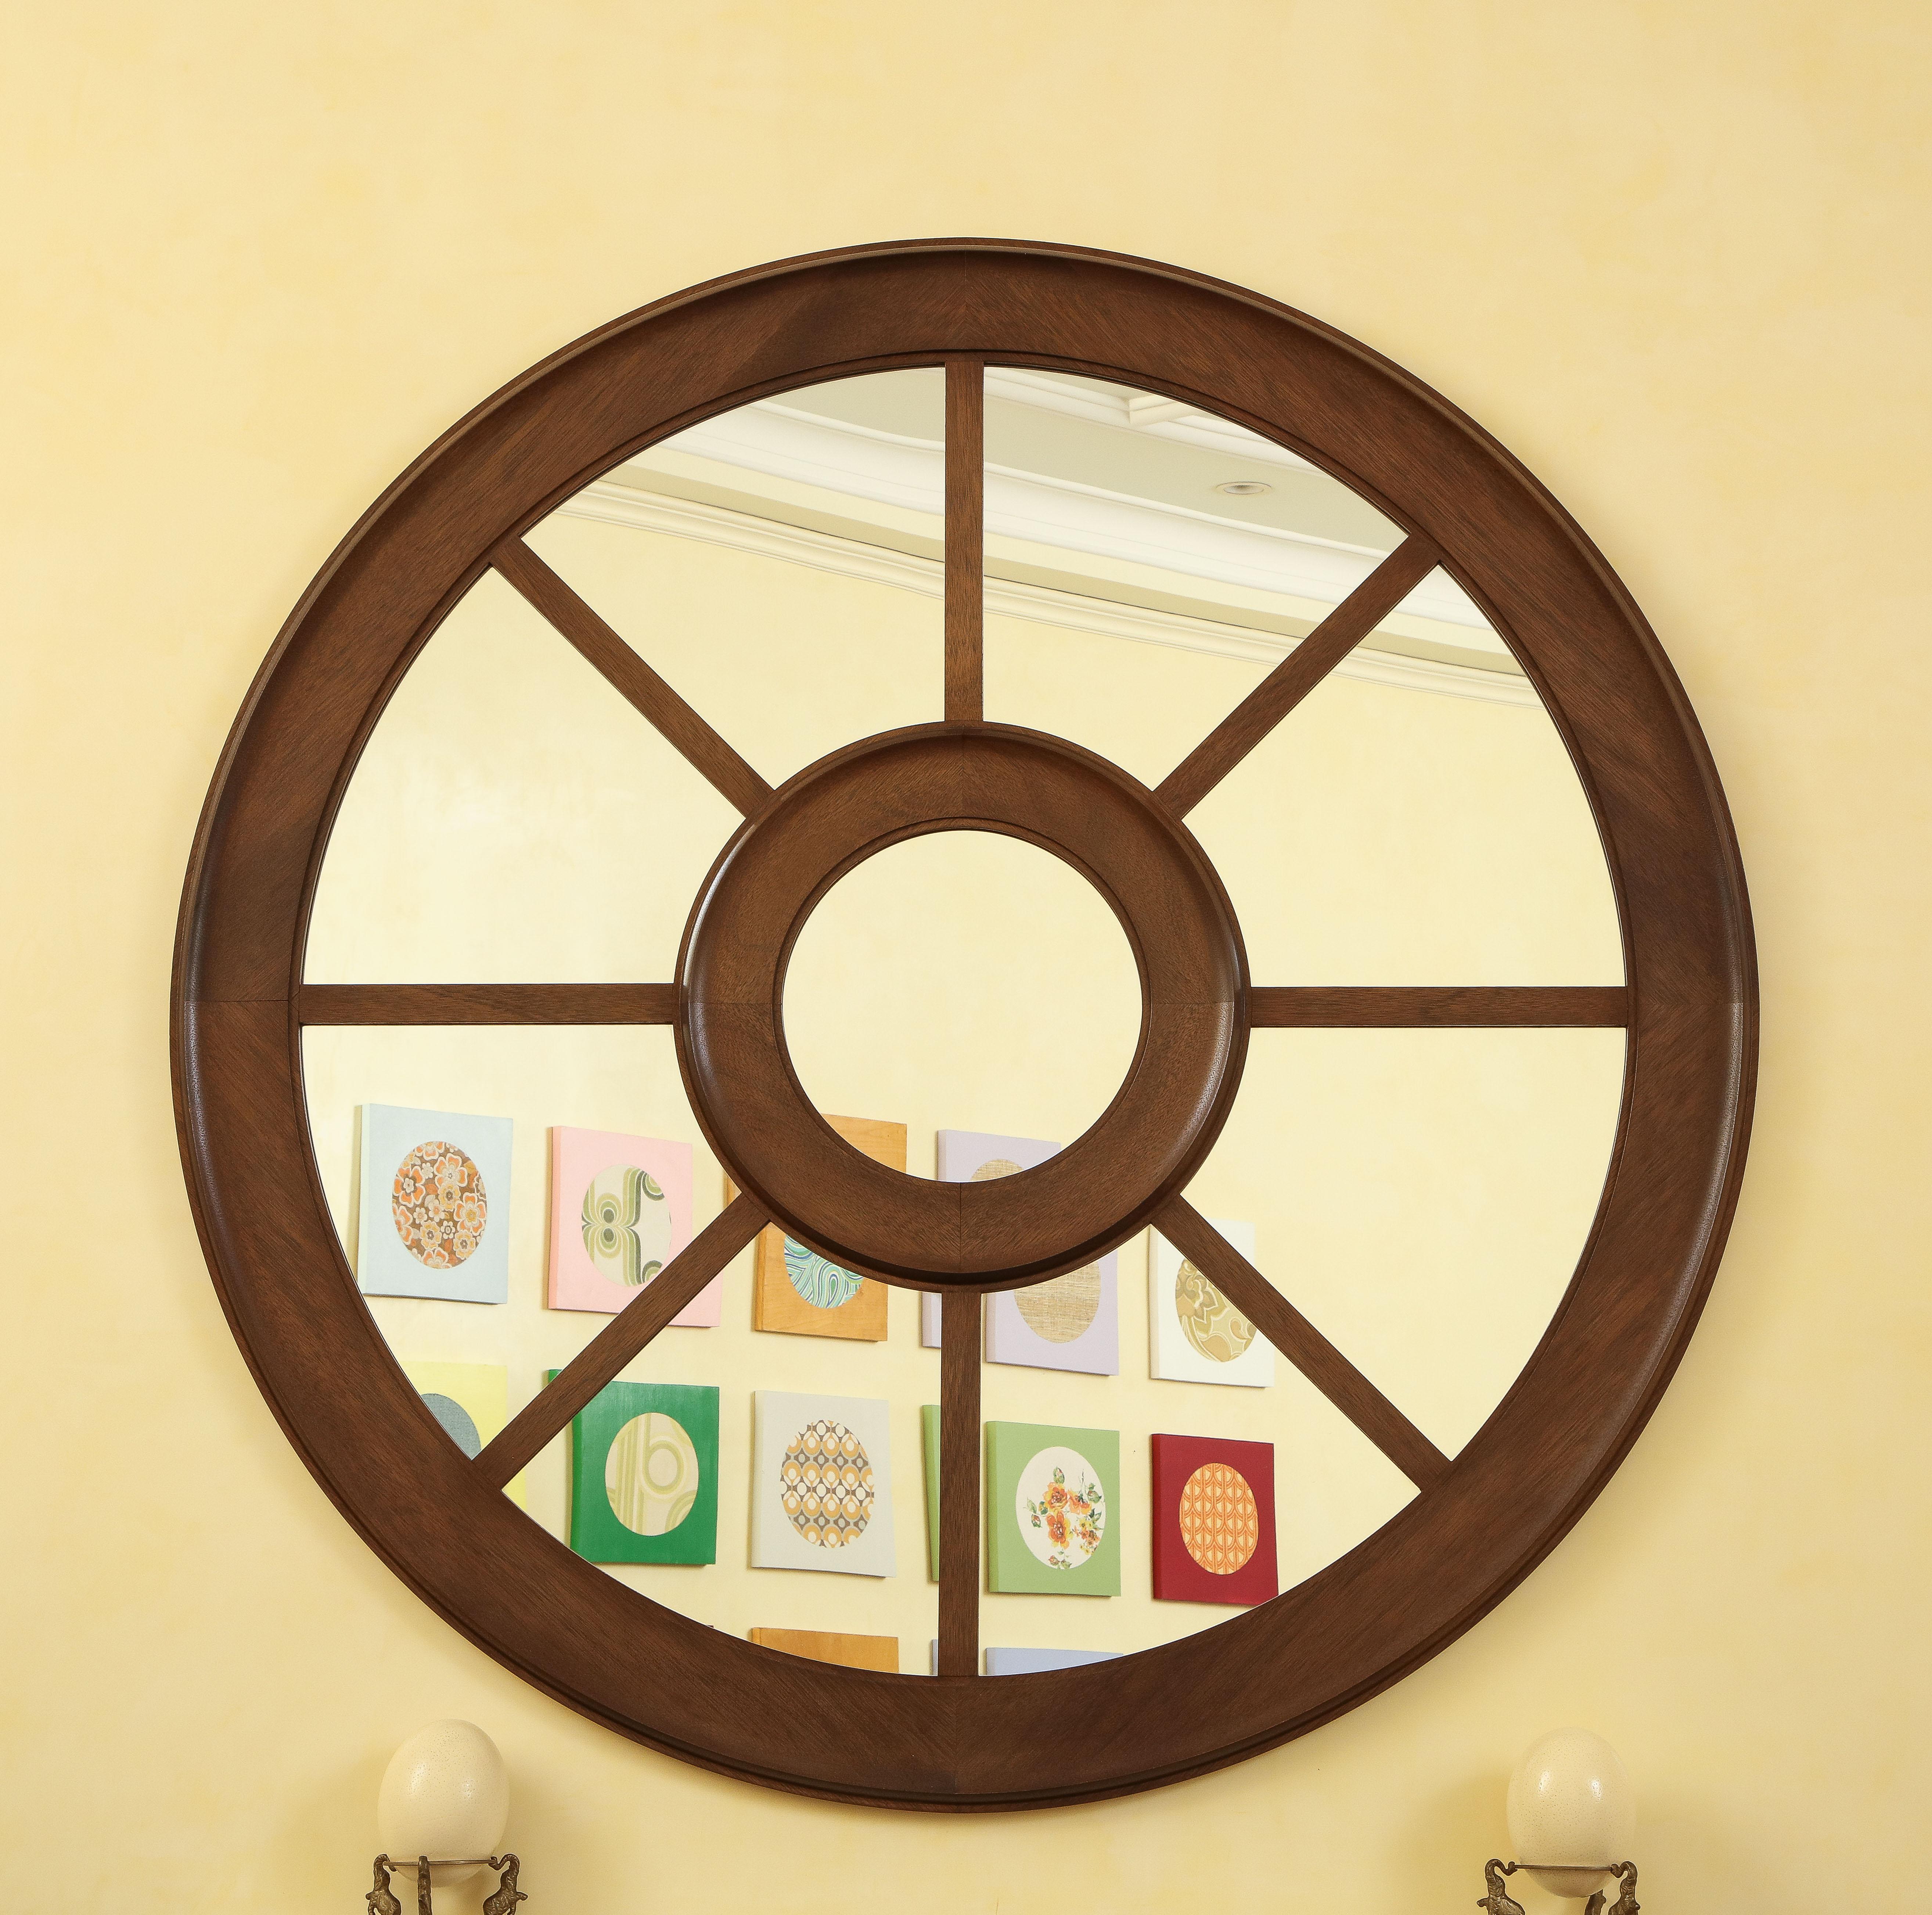 Grand, large-scale circular wall mirror with sections in wagon wheel design.